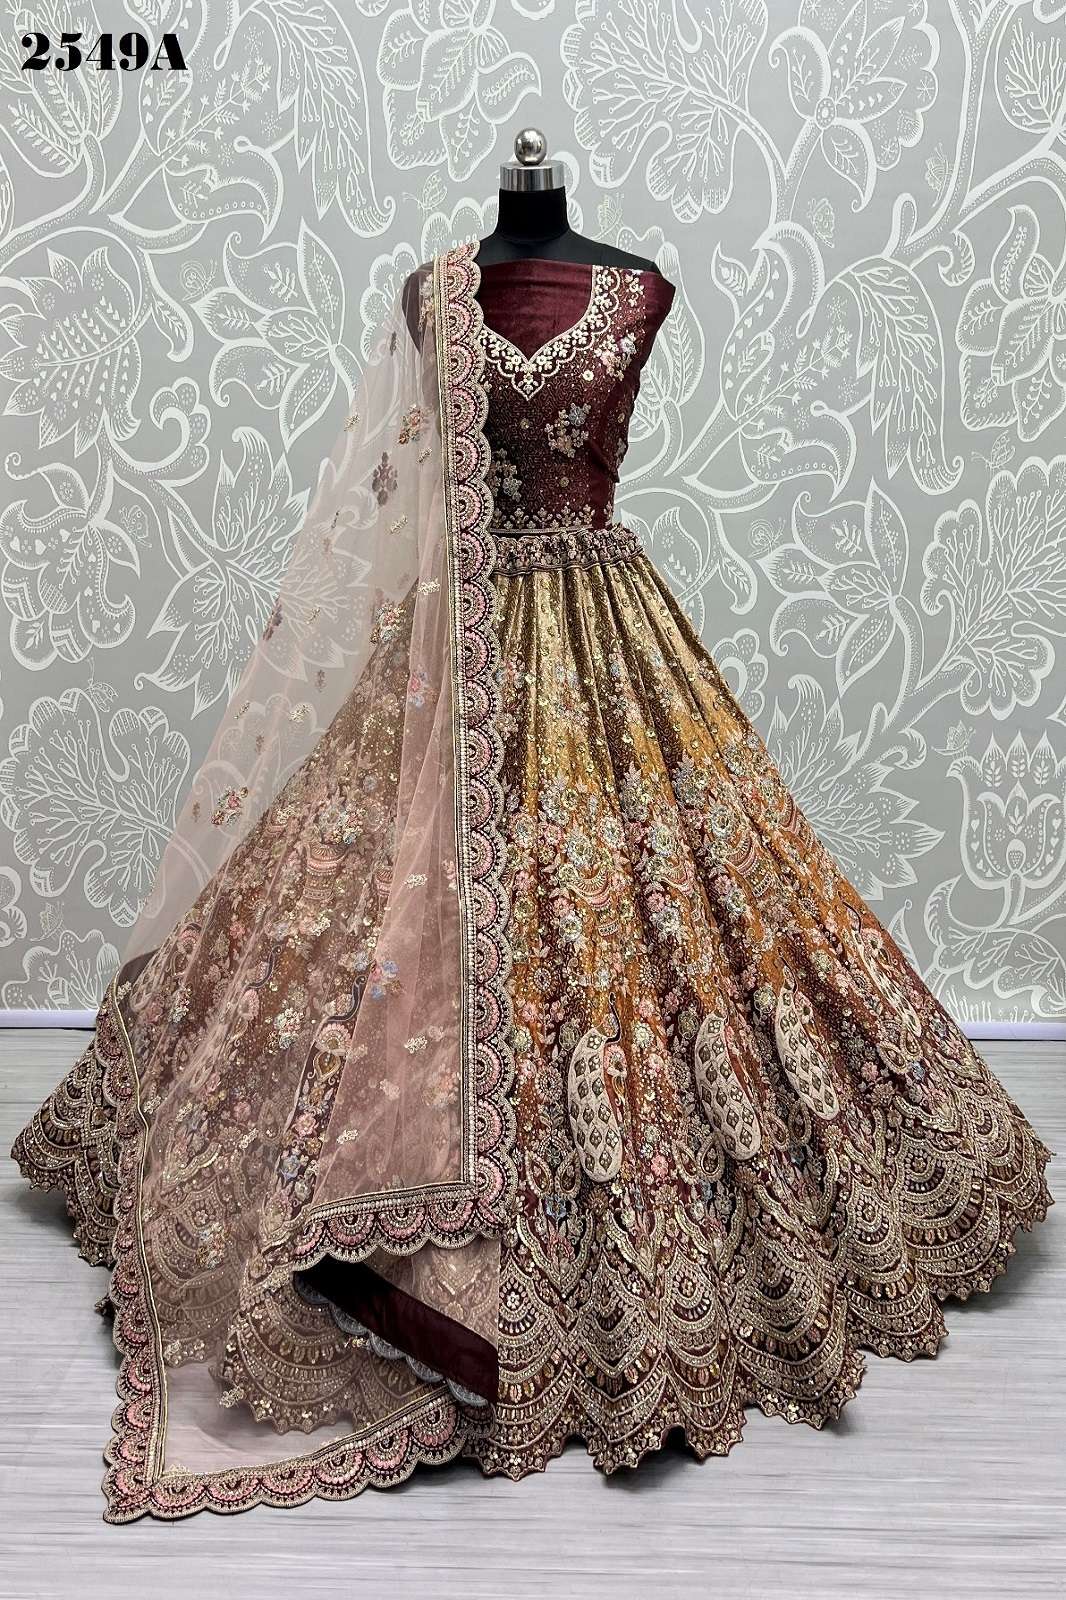 Mumtaz – Meticulously crafted lehenga choli ensemble in a vibrant tangerine  red color. Embellished fully with oxidized antique gold wor... | Instagram